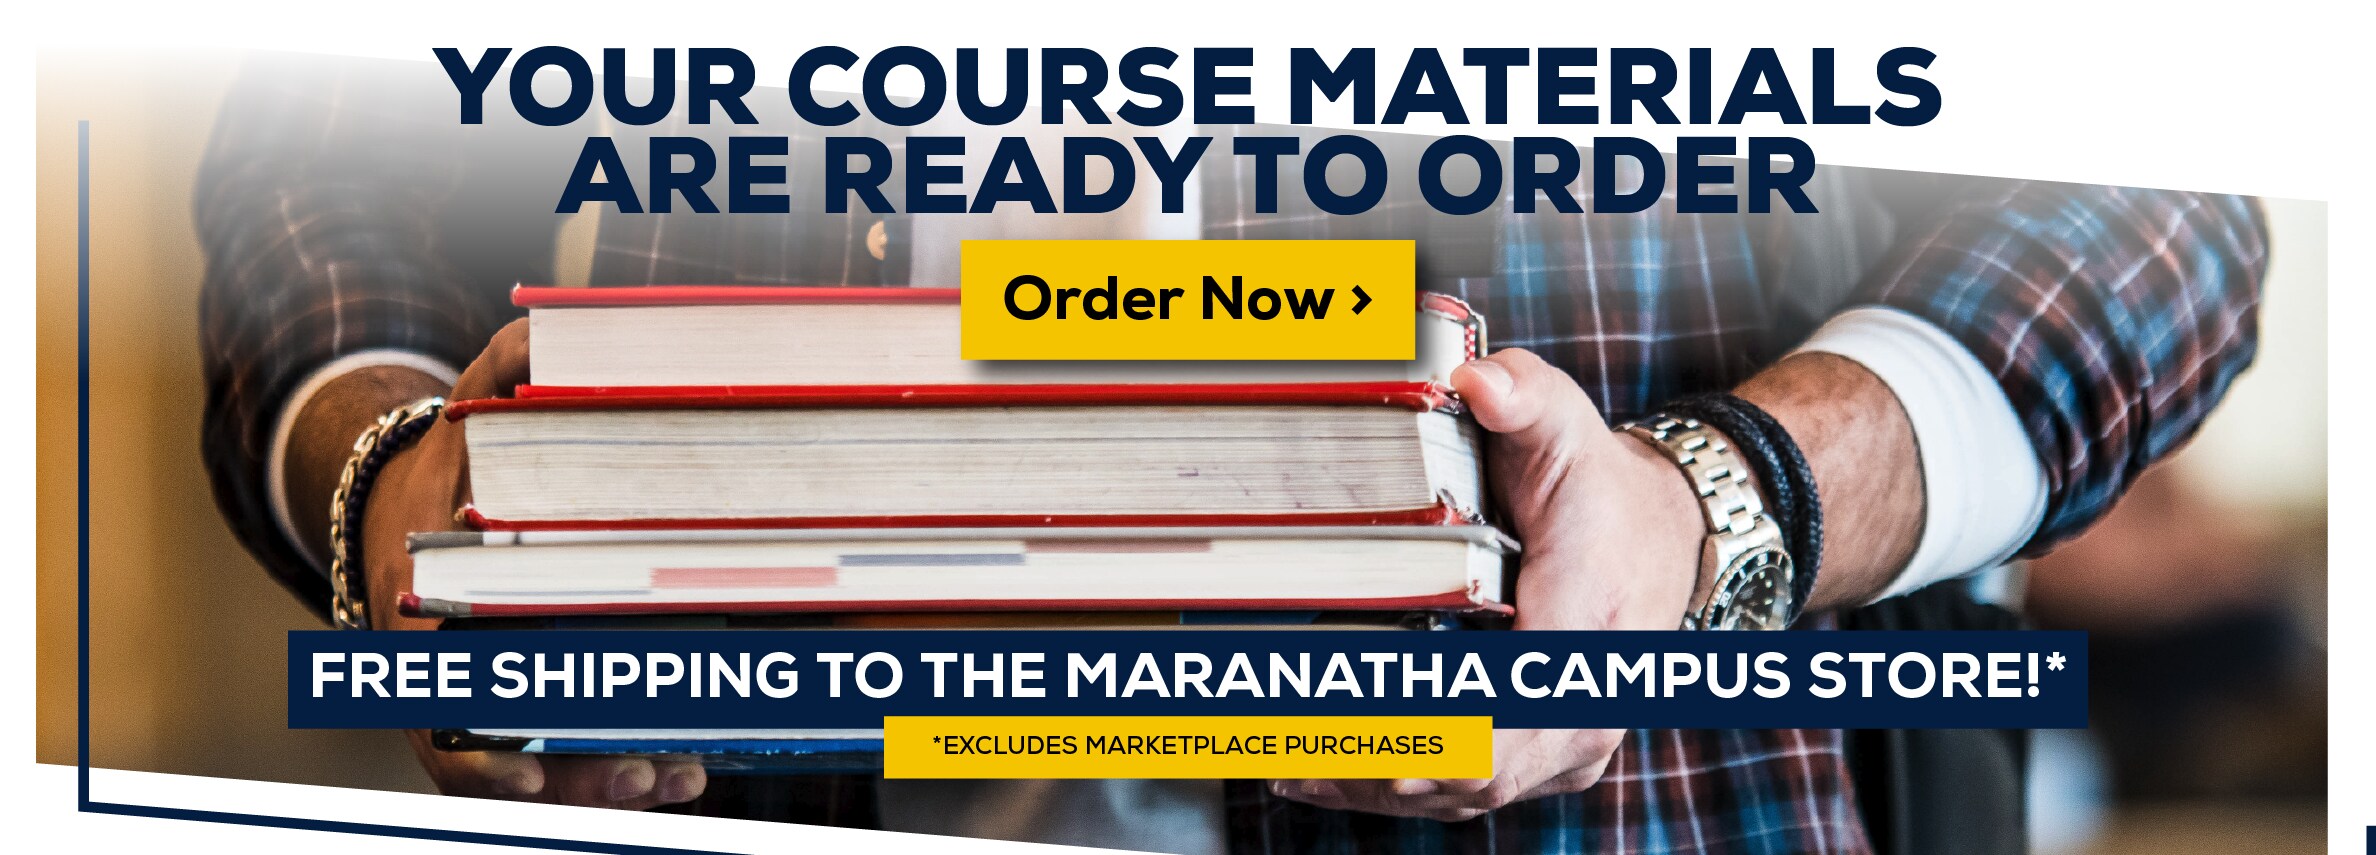 Your Course Materials Are Ready to Order. Order Now. Free shipping to the Maranatha Campu Store.* *Excludes marketplace purchases